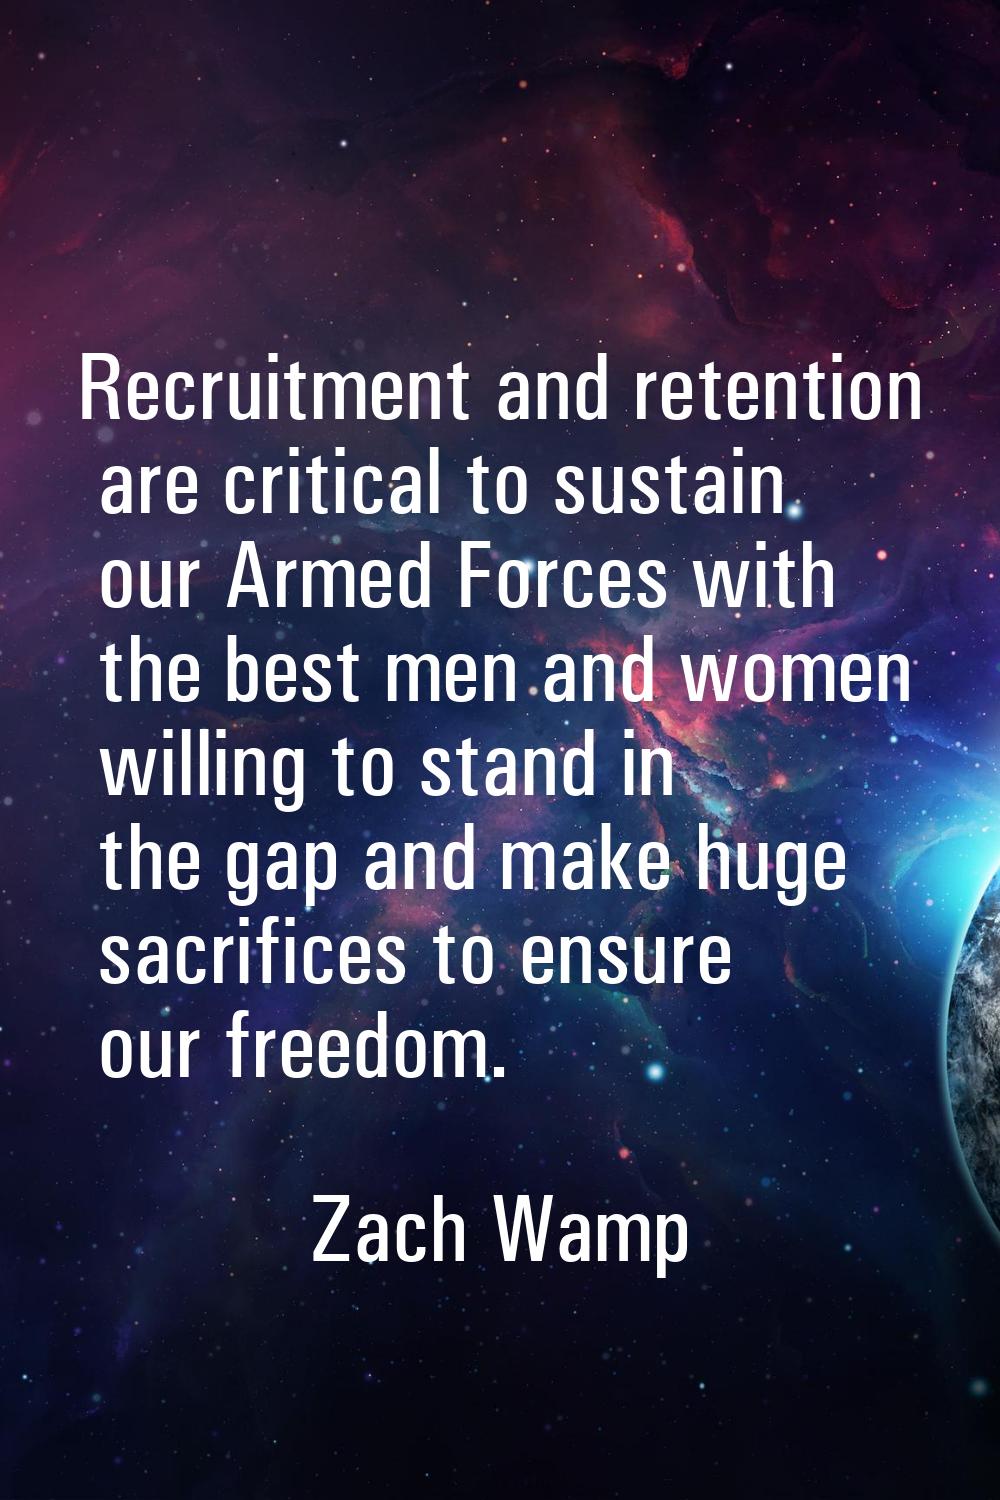 Recruitment and retention are critical to sustain our Armed Forces with the best men and women will